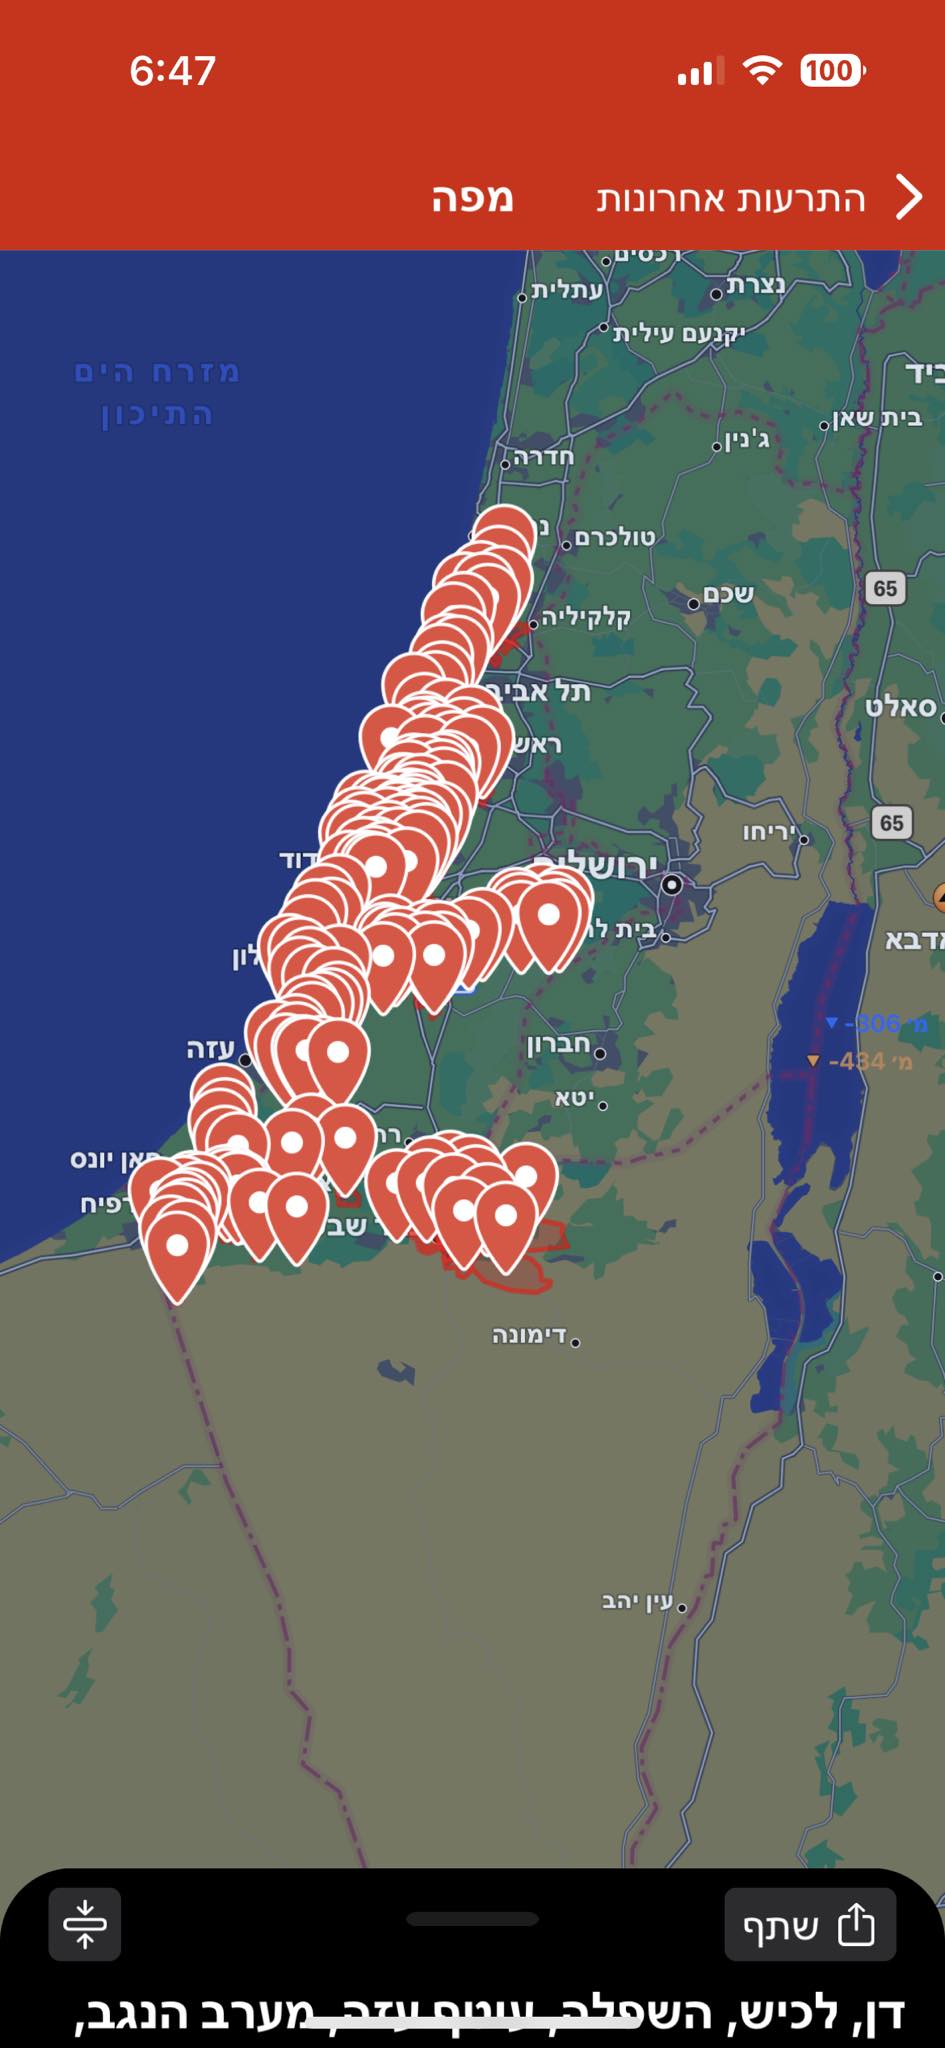 Hundreds of incoming rockets appear as red dots blanketing central Israel at 6:34 am on Oct. 7 in the "Tzeva Adom" or "Red Alert" phone app. (Photo by Larry Luxner)